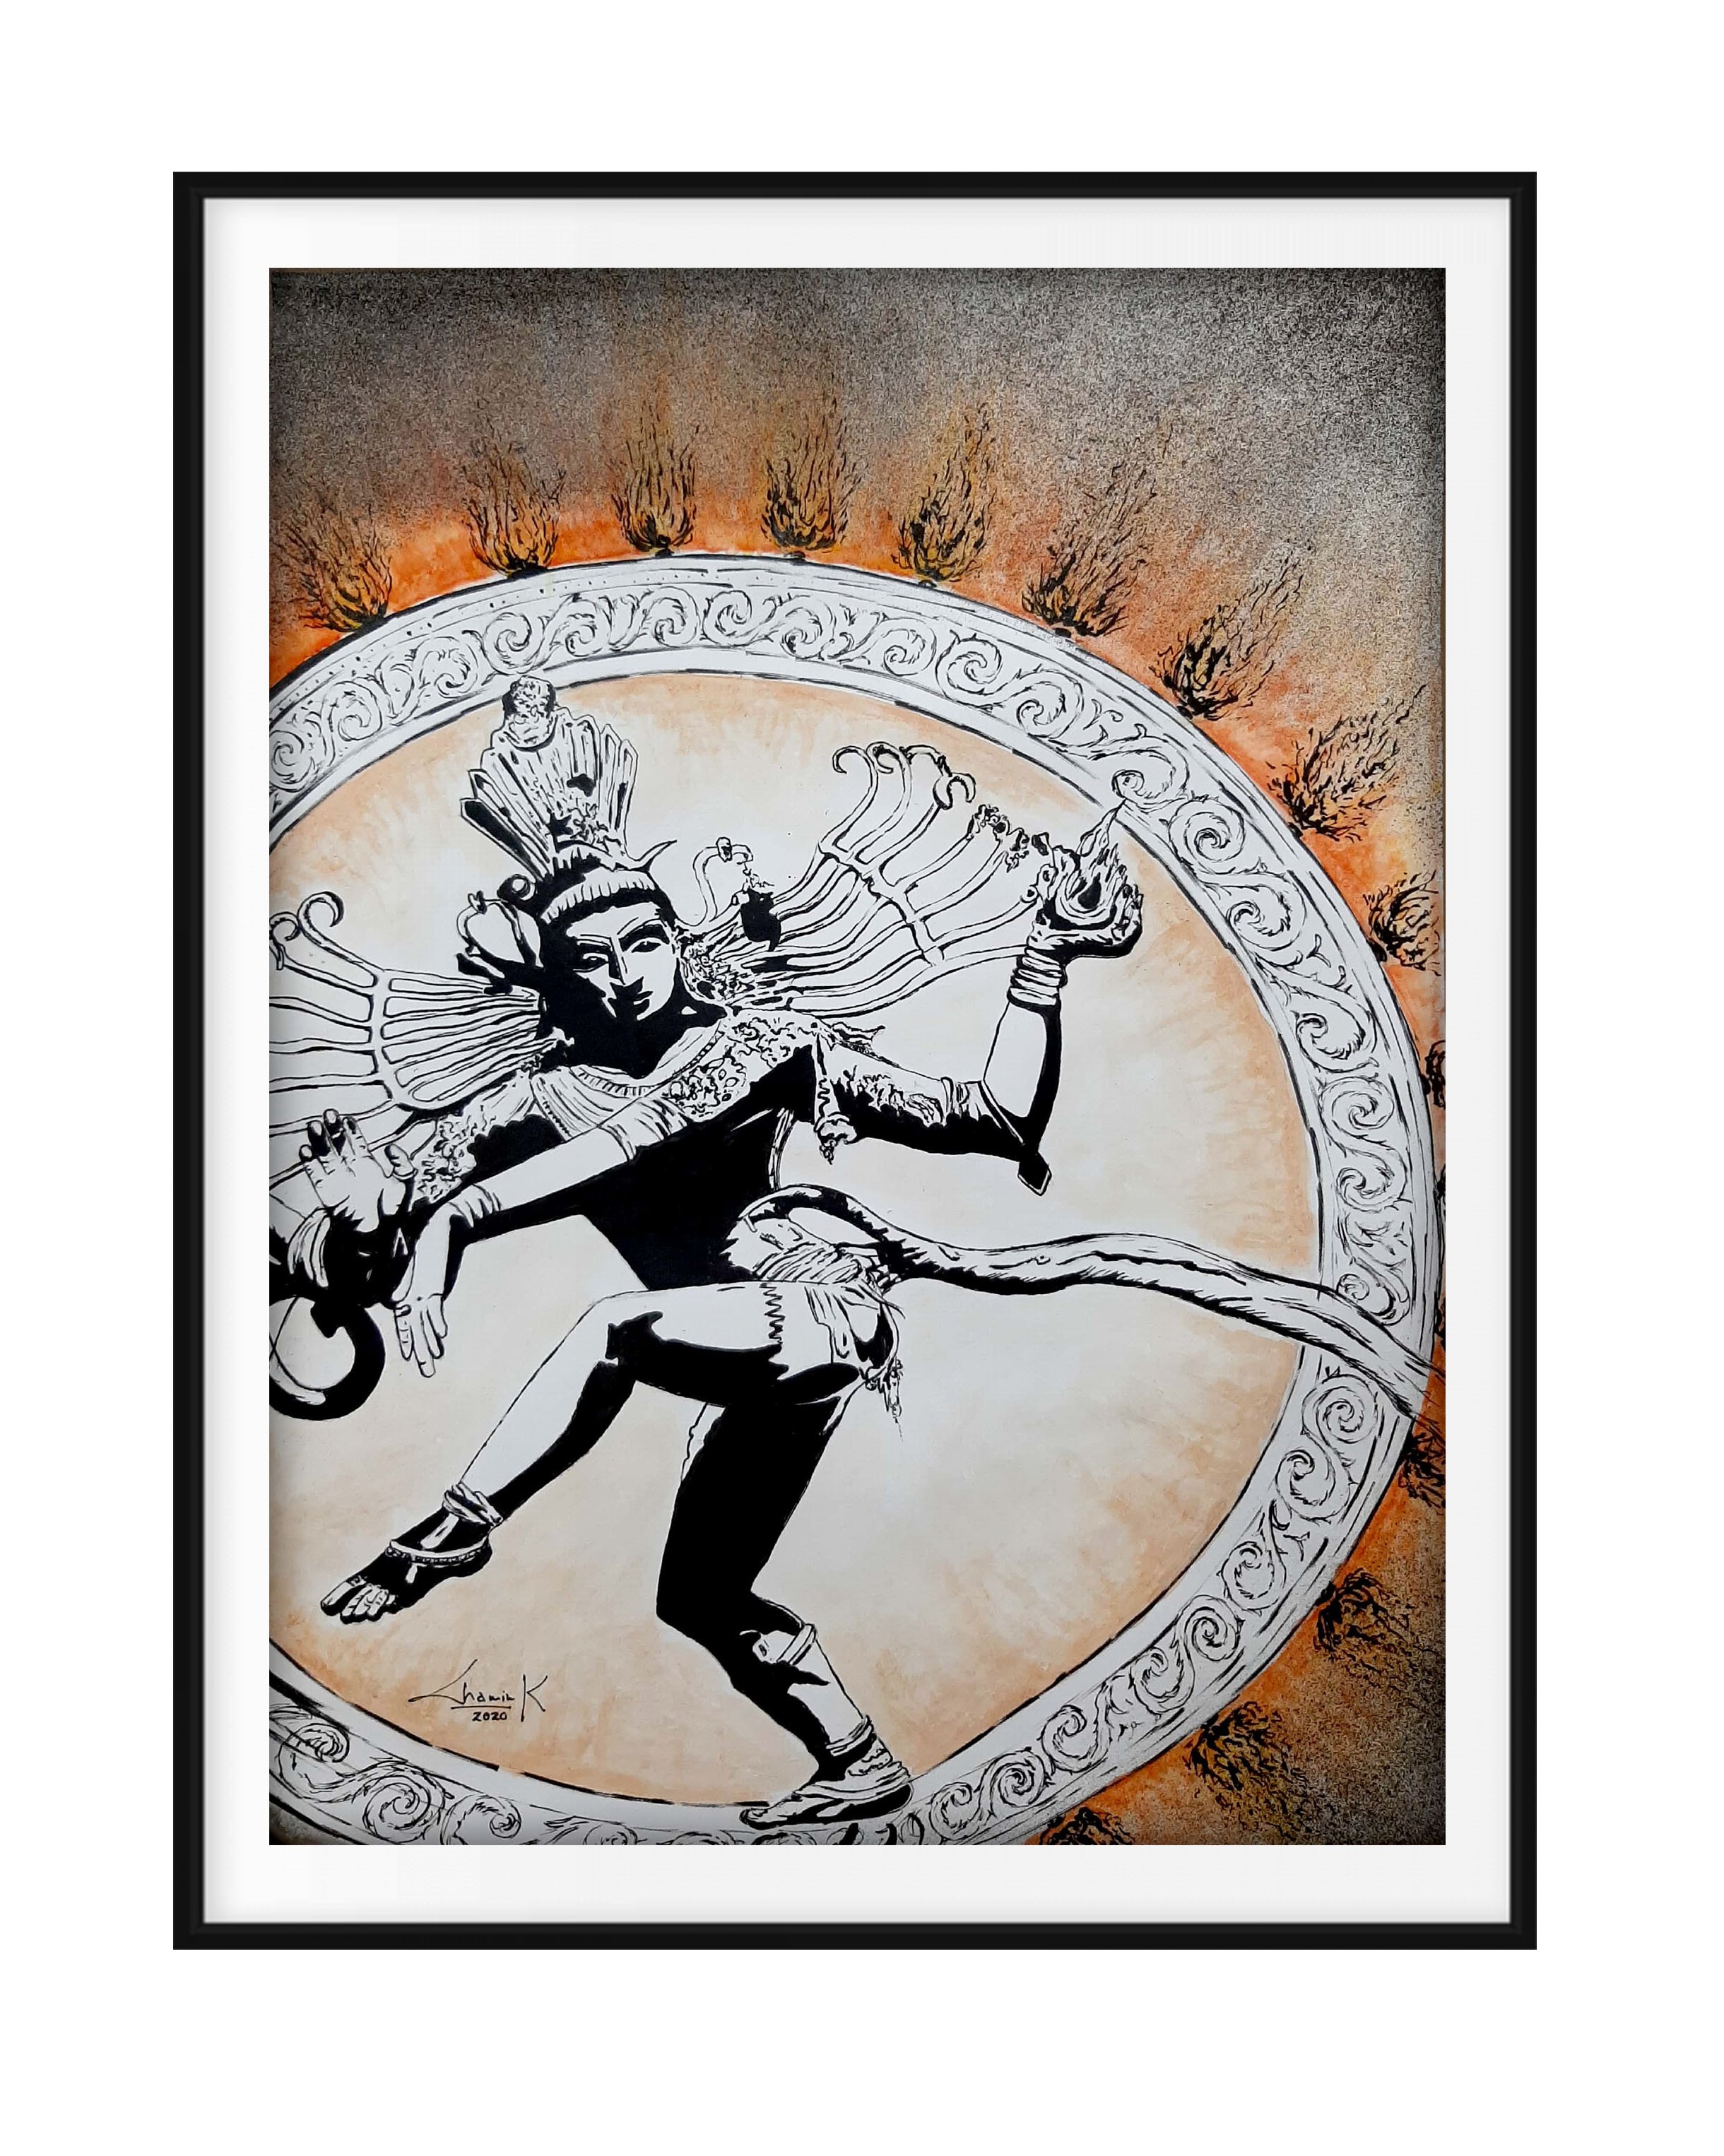 DANCE OF SHIVA by Chamin Kalubowila